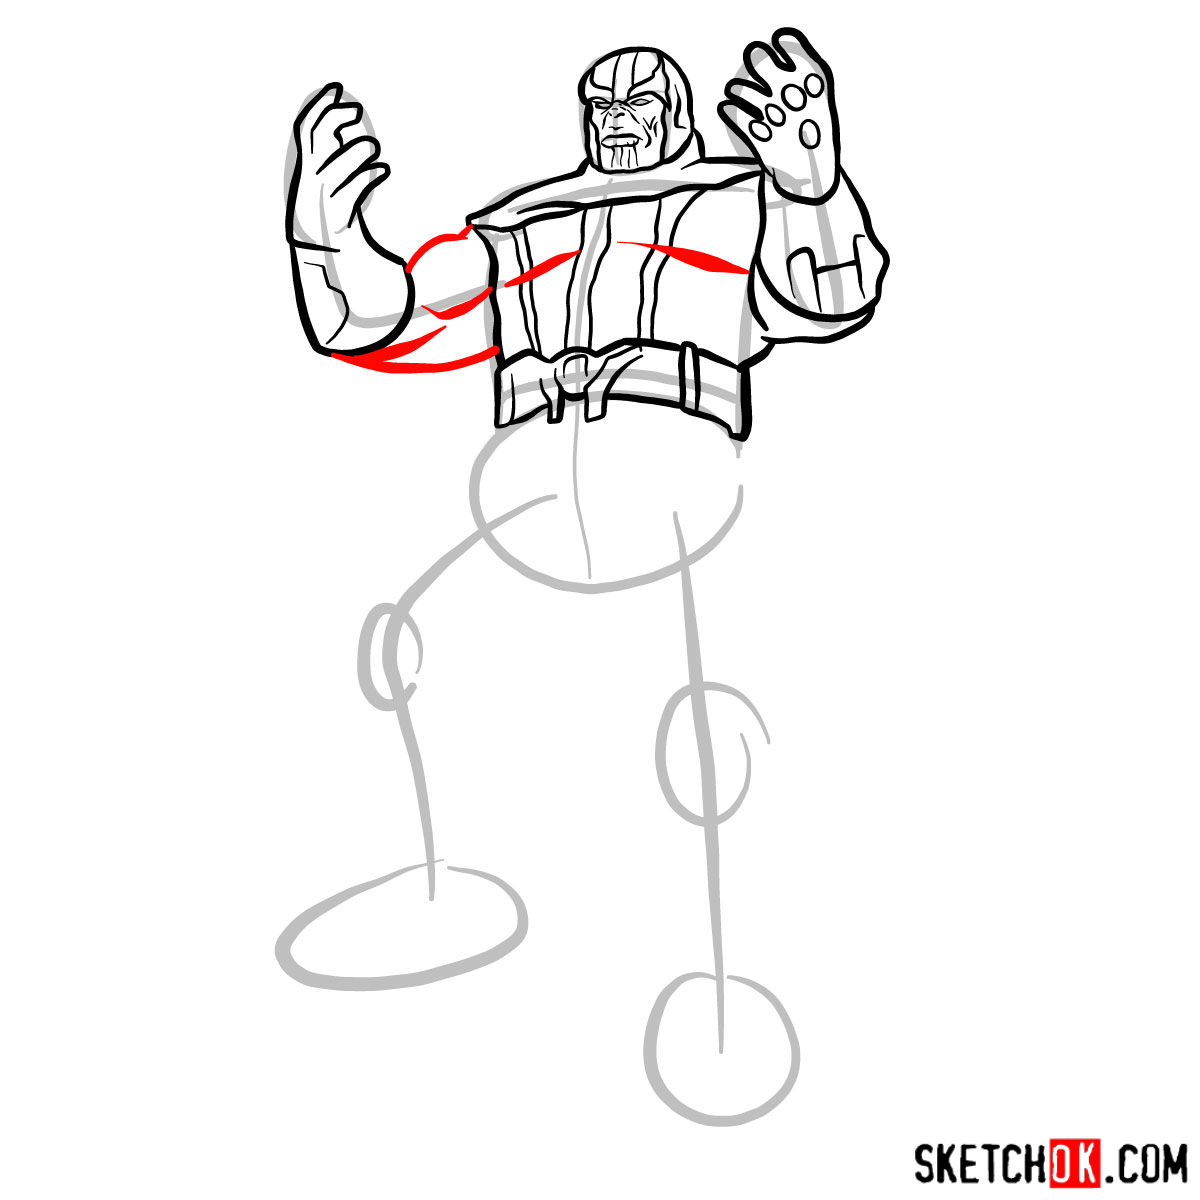 How to draw Thanos with 5 Infinity Stones - step 11